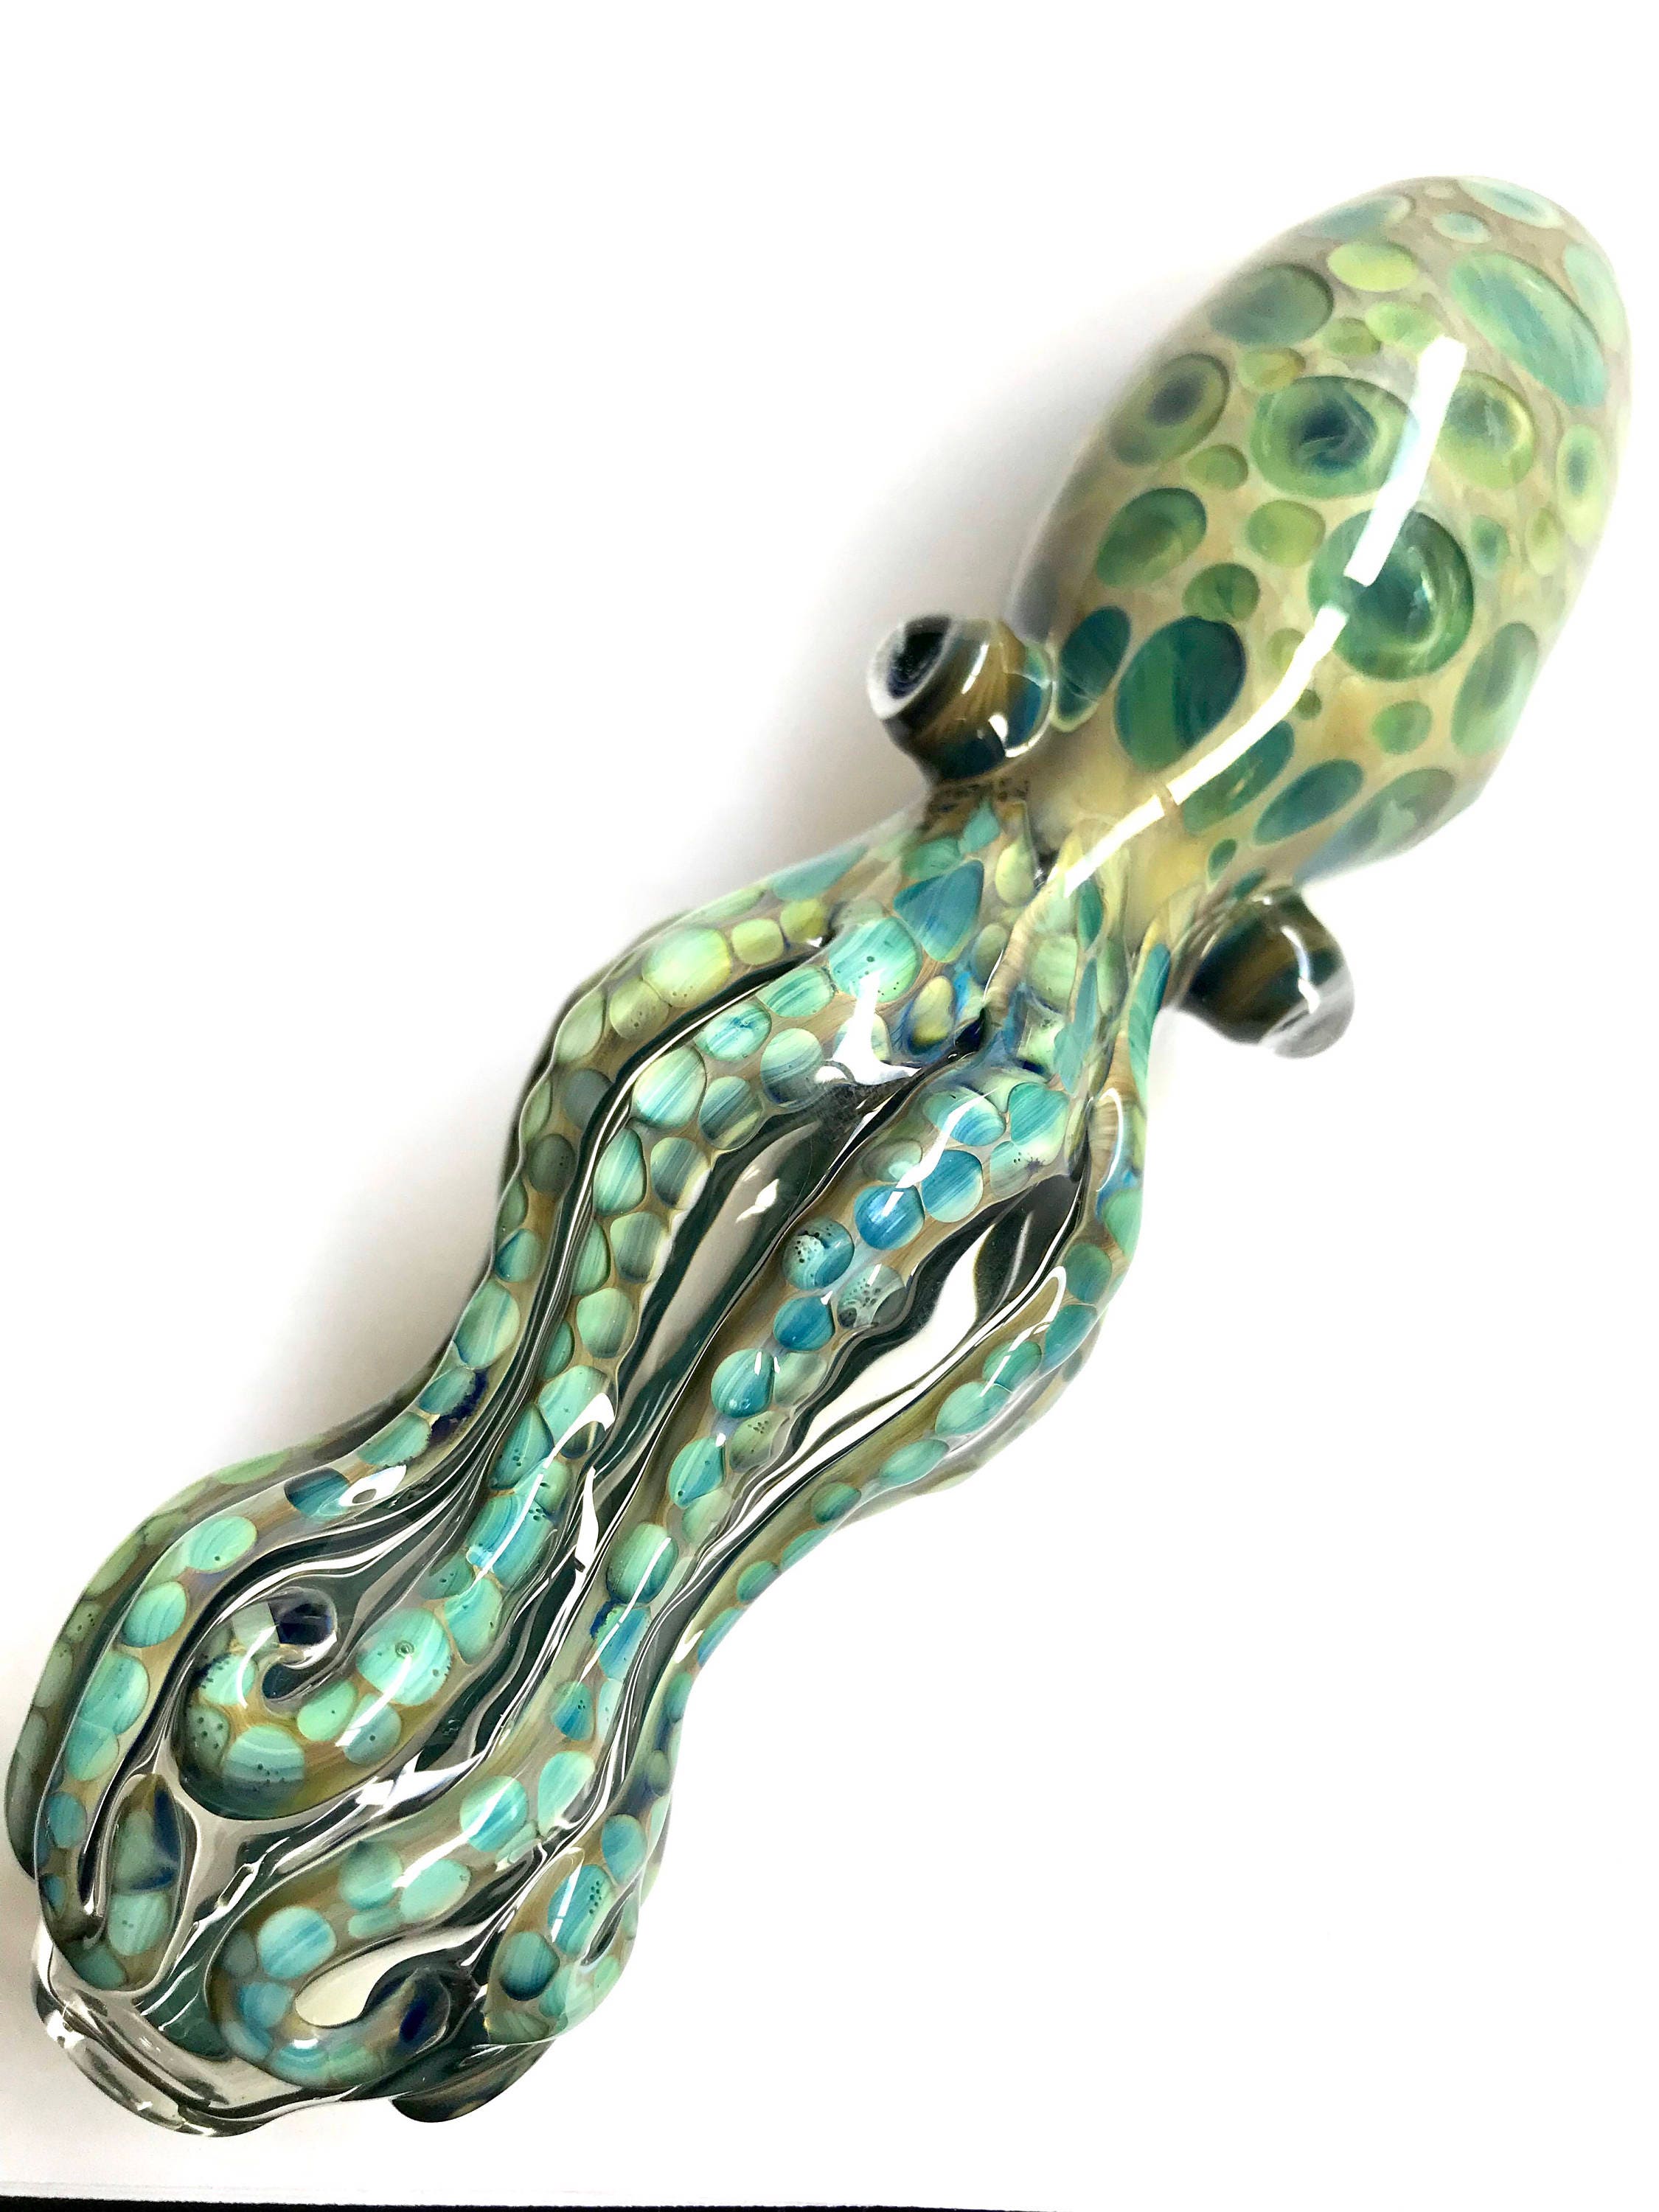 Octopus Glass Pipe Themed Pipes, Weed Bowls For Sale